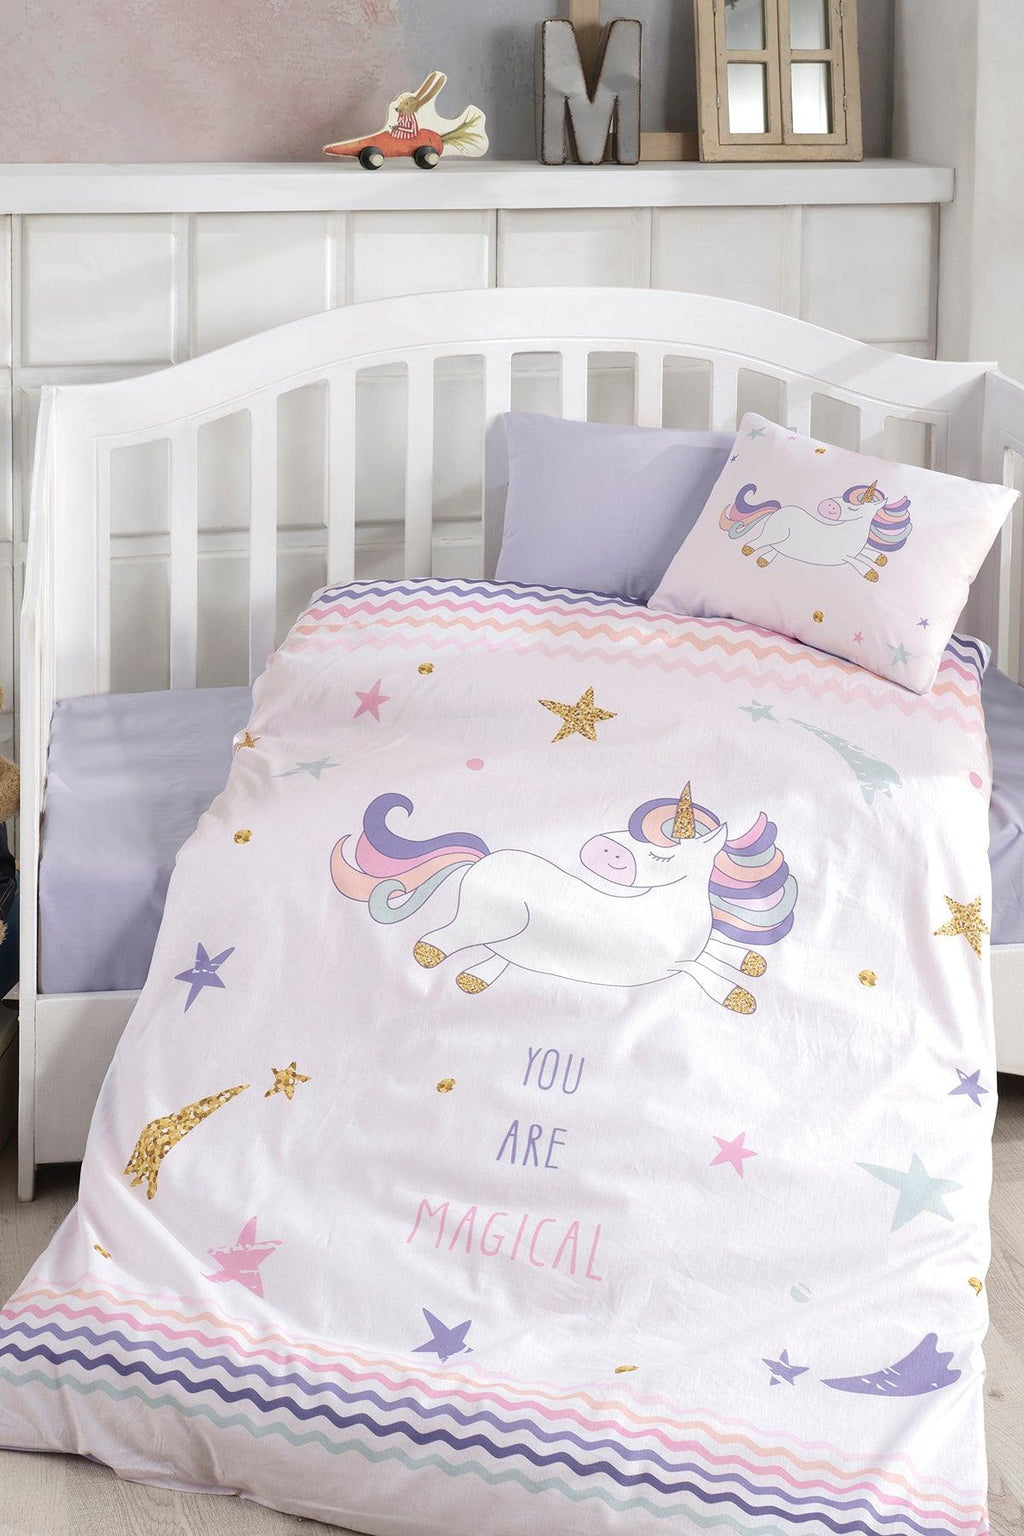 100% Turkish Cotton Baby Duvet Cover Set of 4  Size  Duvet cover: 100 cm x 150 cm  Flatsheet :120 cm x 160 cm  Pillows :35 cm x 45 cm each  Please note that the duvet is not included.  Product Details  Complete your little one's bedding with the cute panda design on the duvet set. Made from 100 % Turkish Cotton, our machine washable sets consist of a duvet cover, a flat sheet and two matching pillow cases. Little ones will absolutely enjoy snuggling into soft cotton fabric. Sweet dreams :)